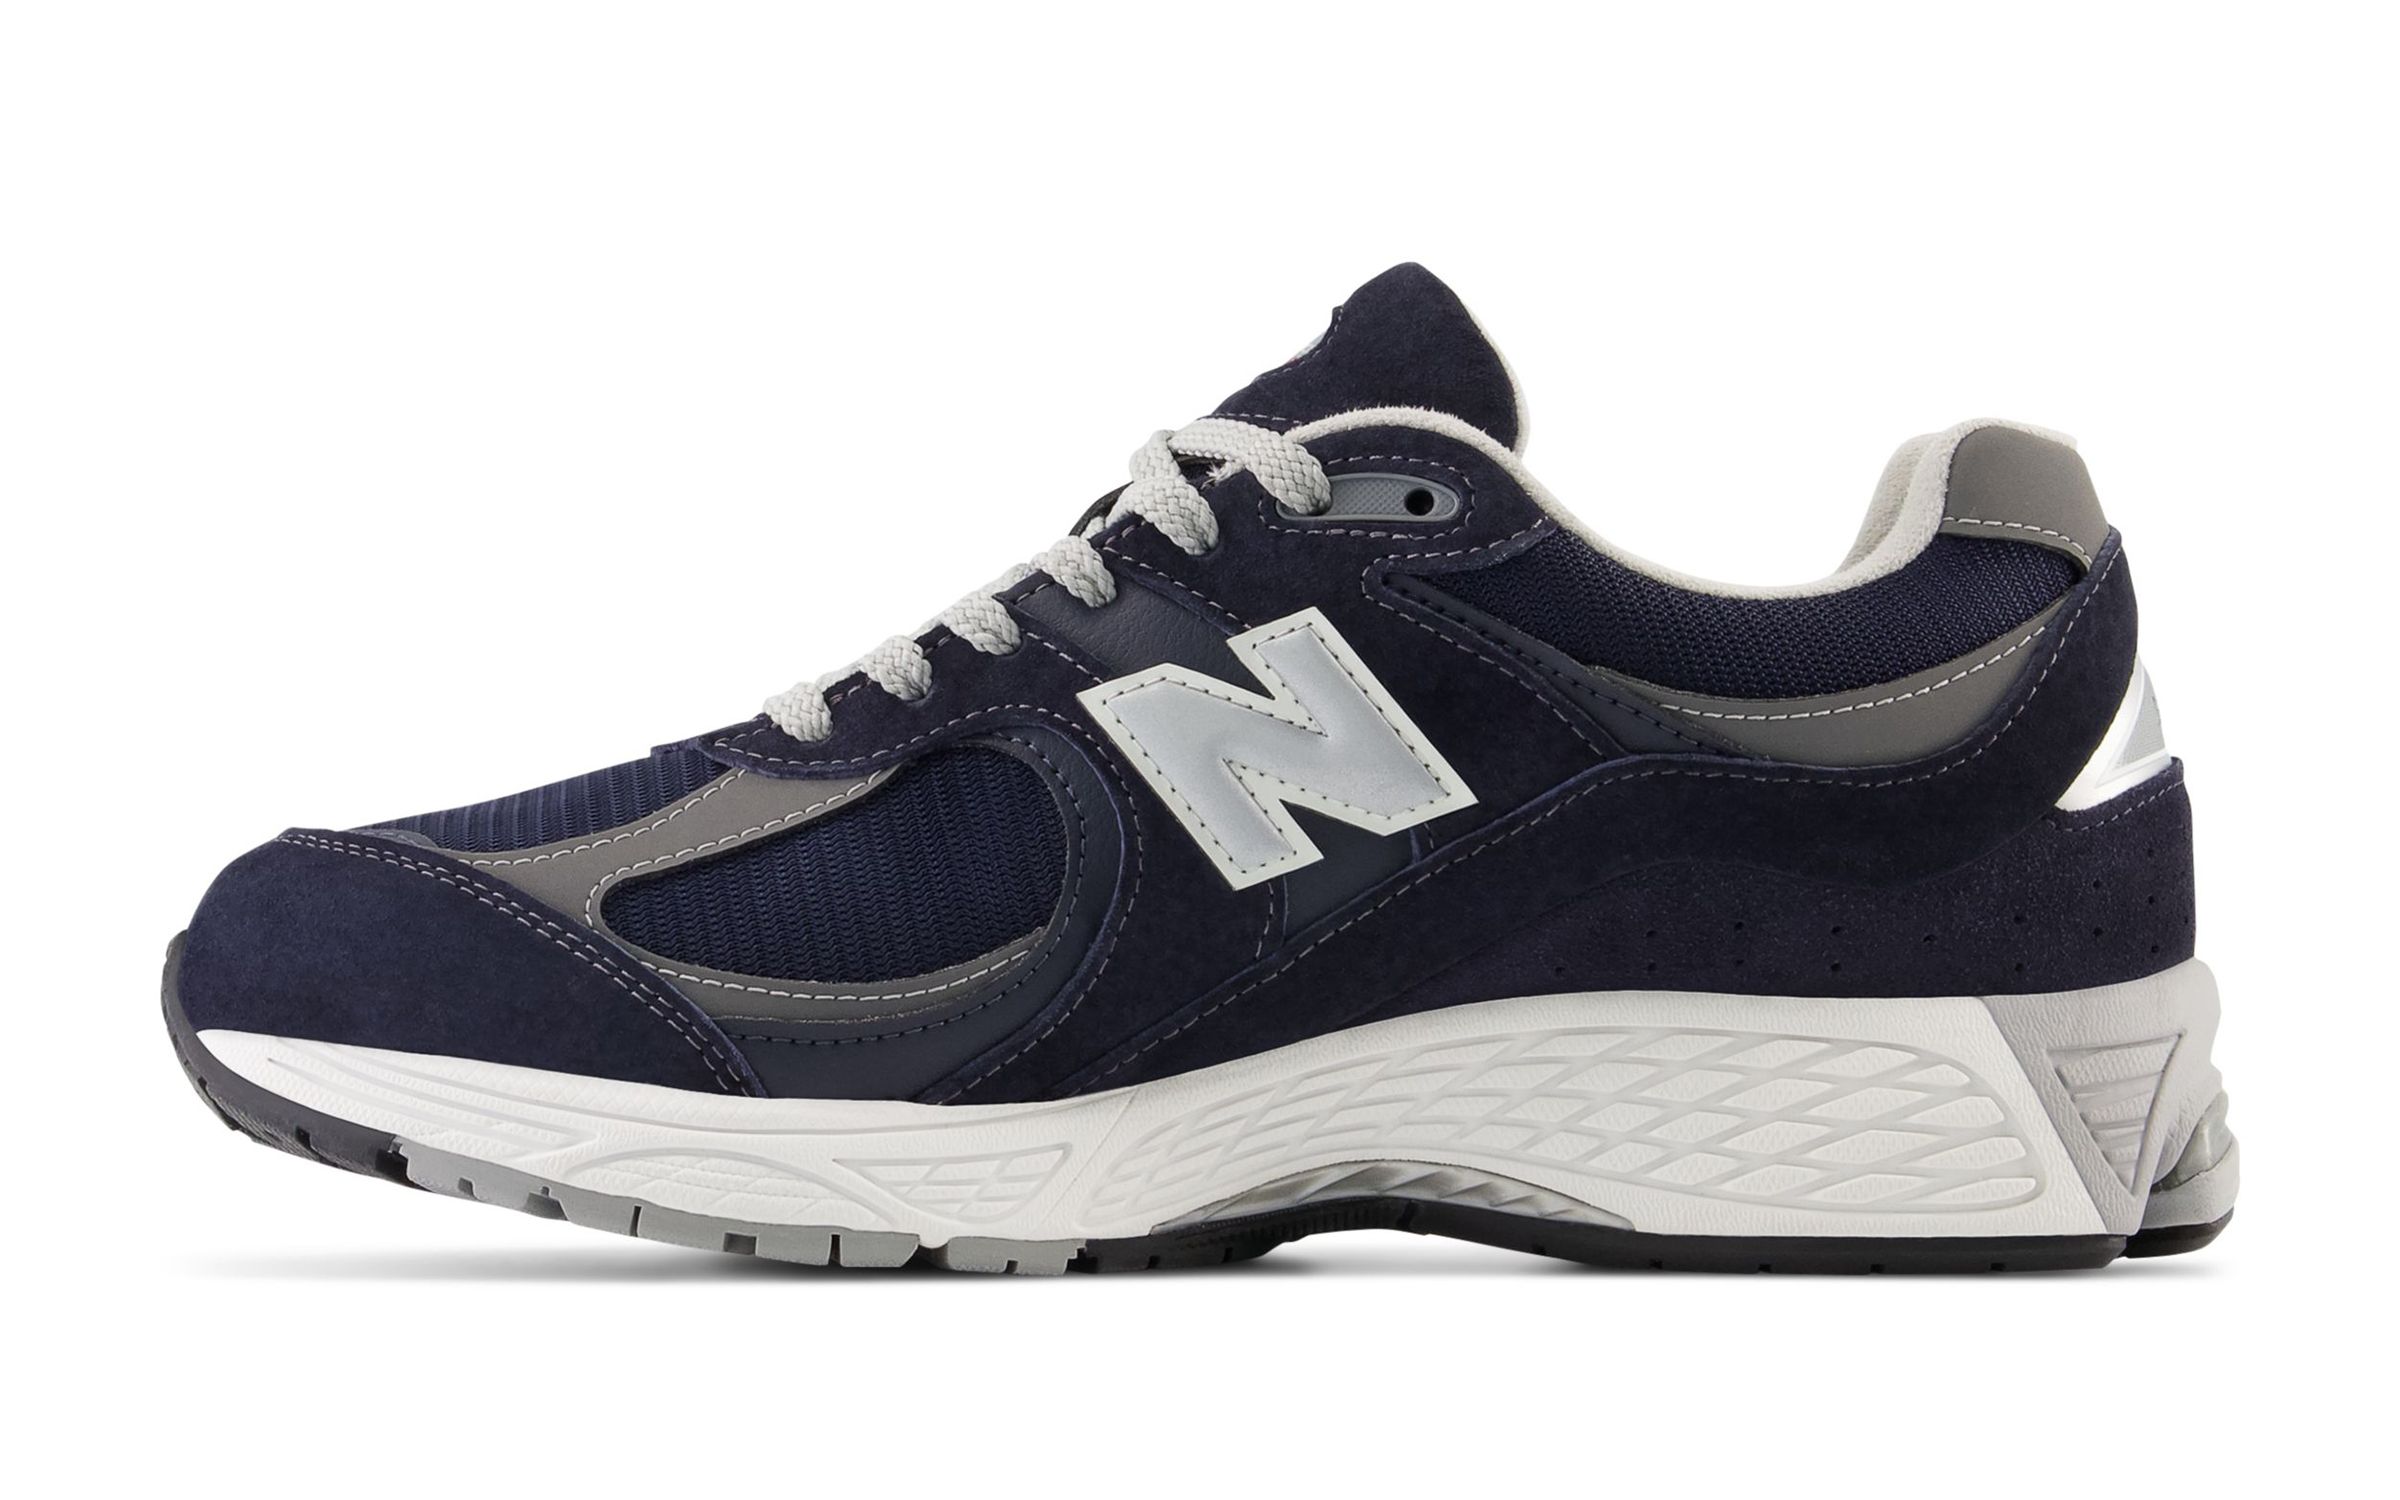 The New Balance 2002R GORE-TEX Returns in Three Color Options